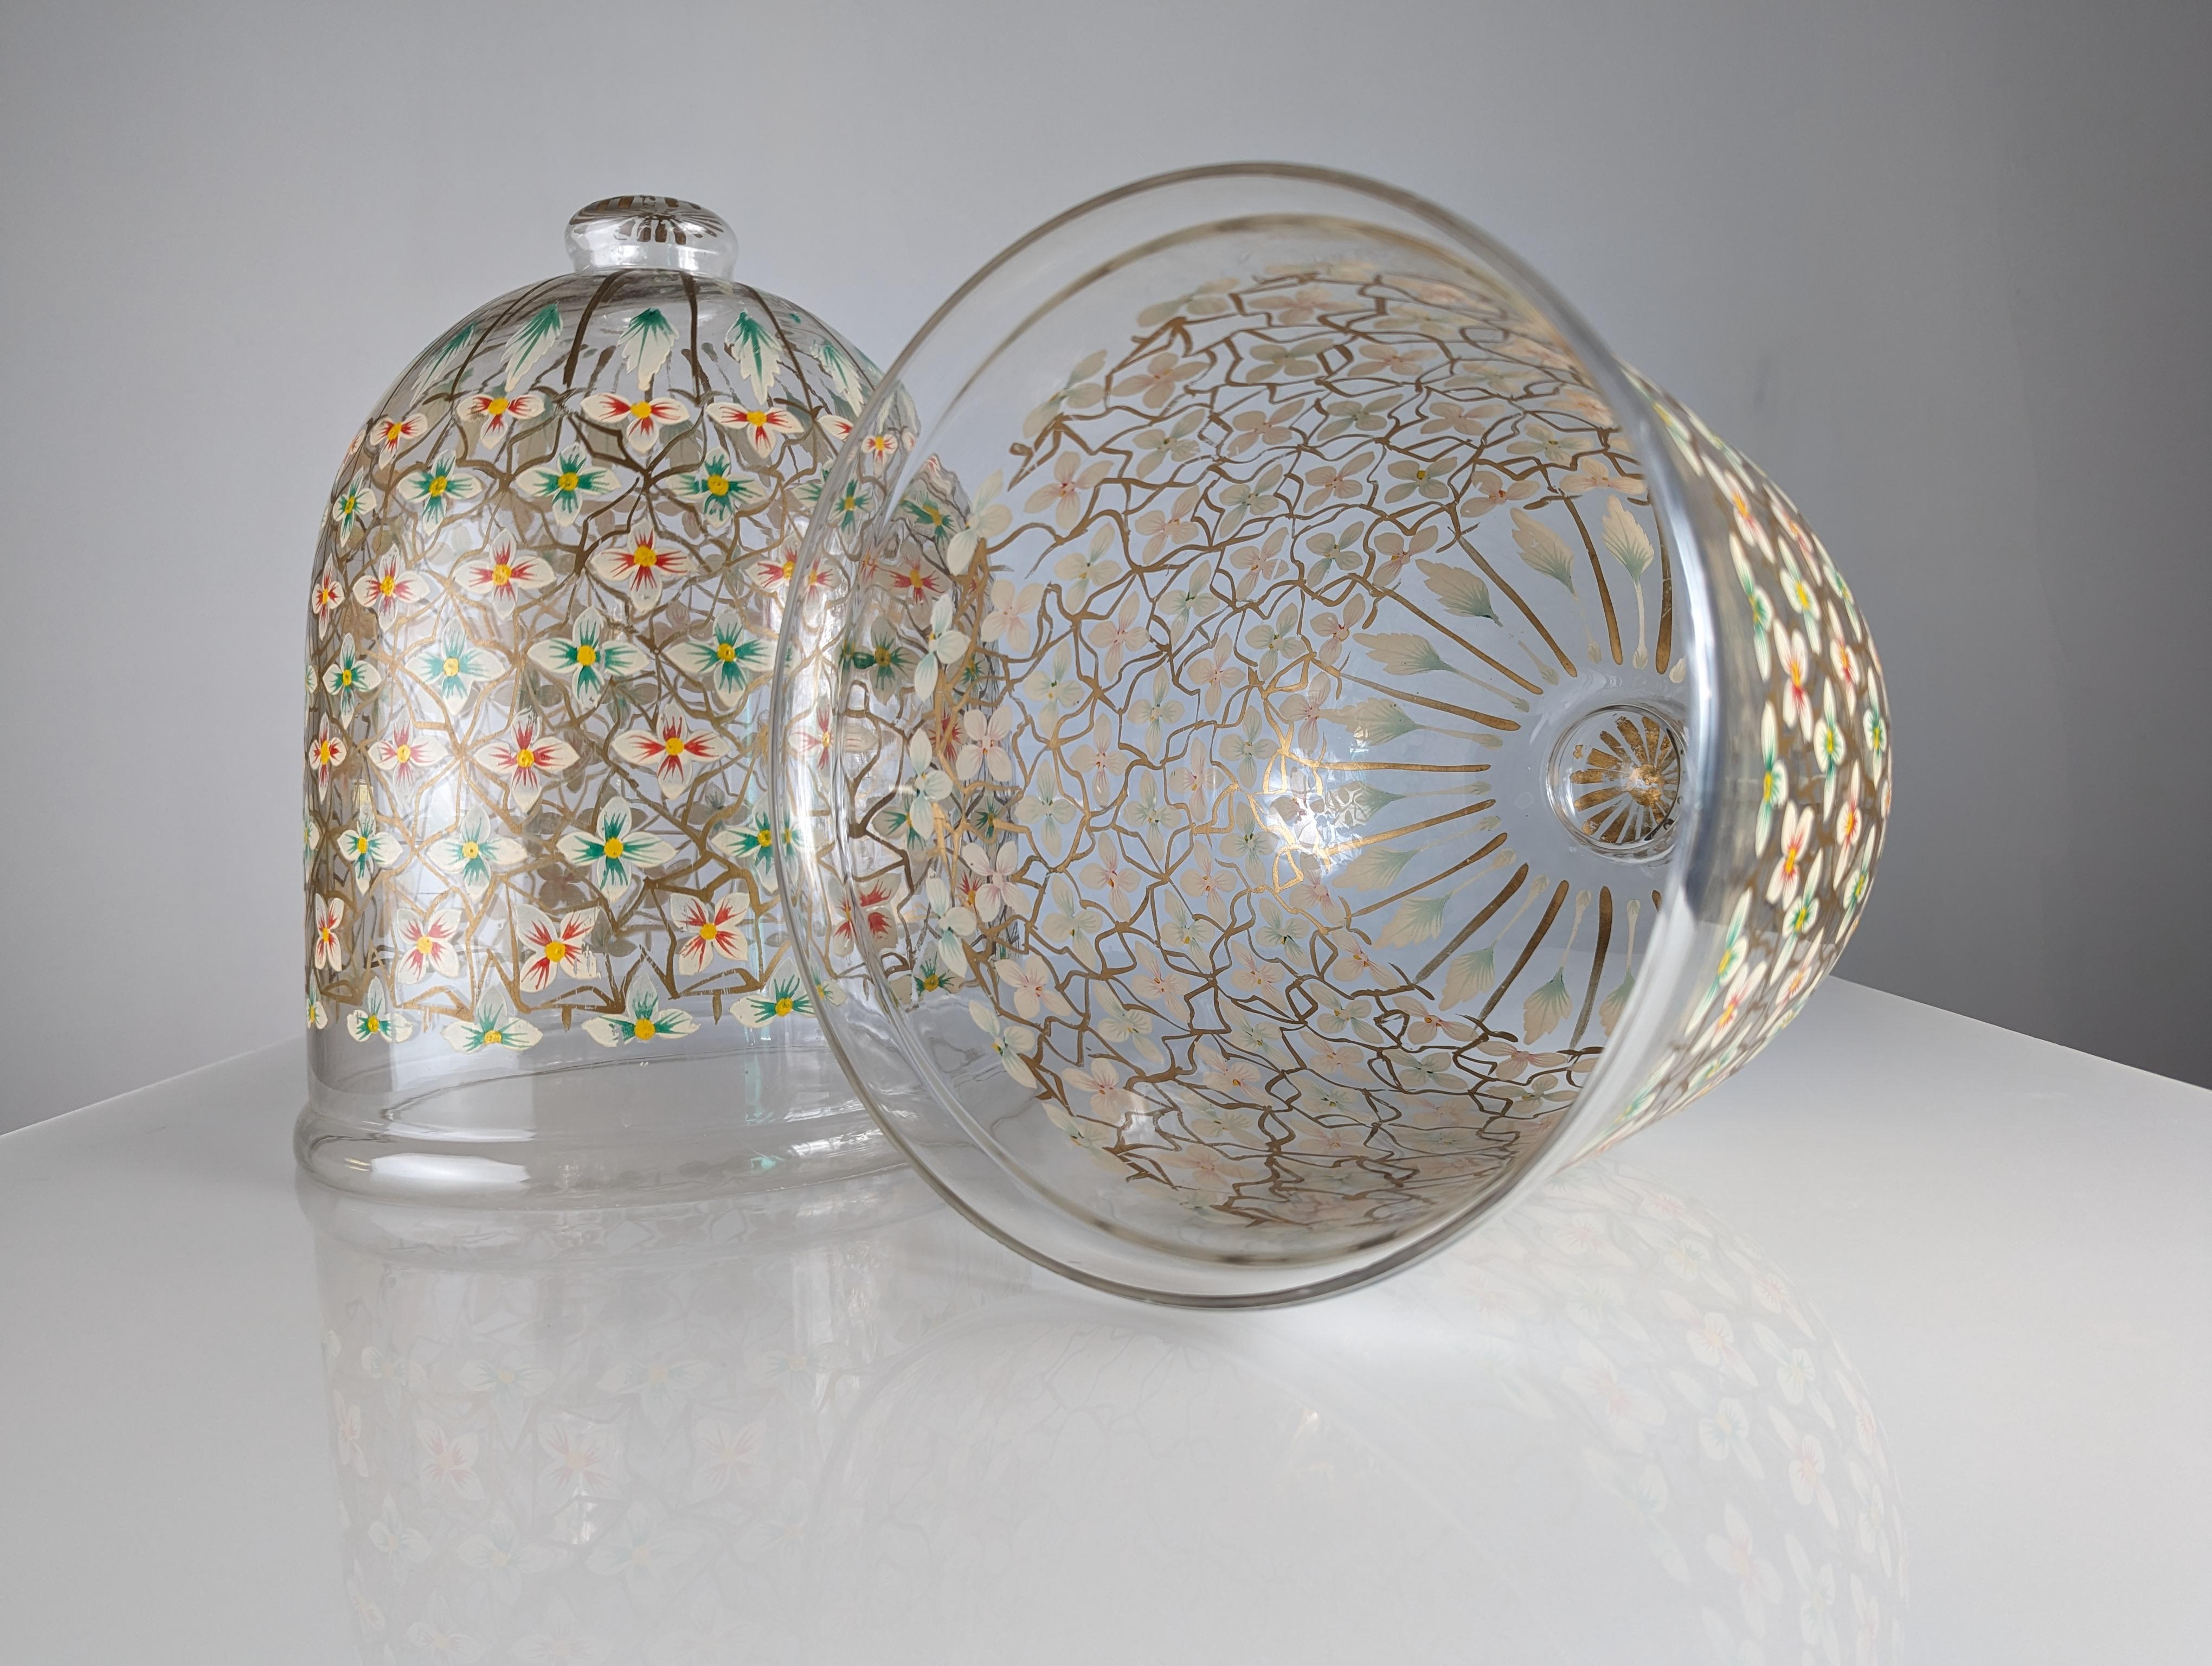 Pair of hand-painted floral glass lanterns For Sale 1